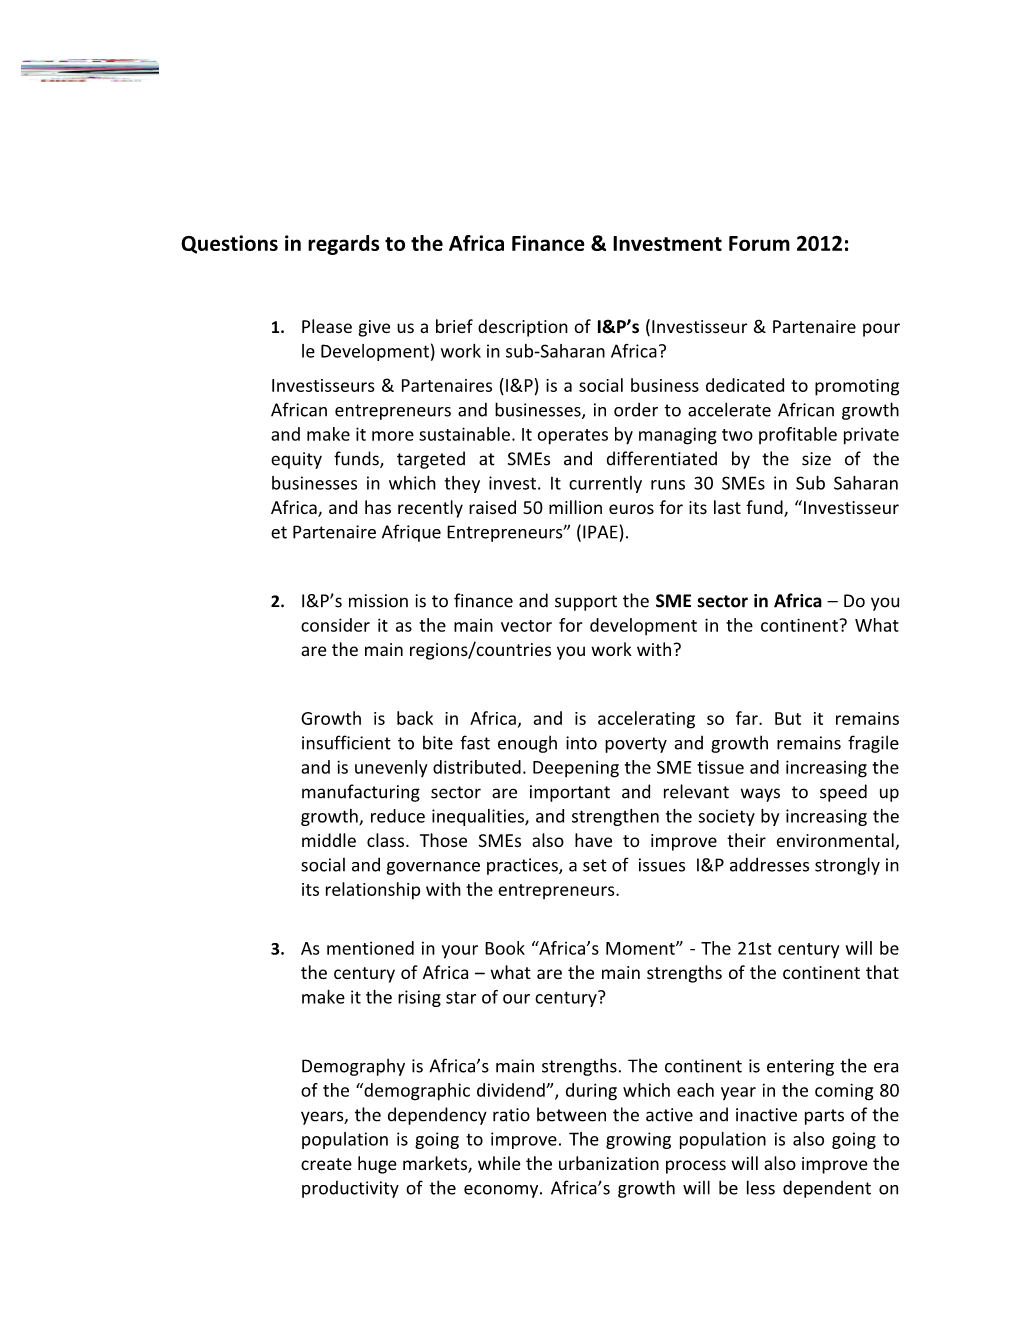 Questions in Regards to the Africa Finance & Investment Forum 2012